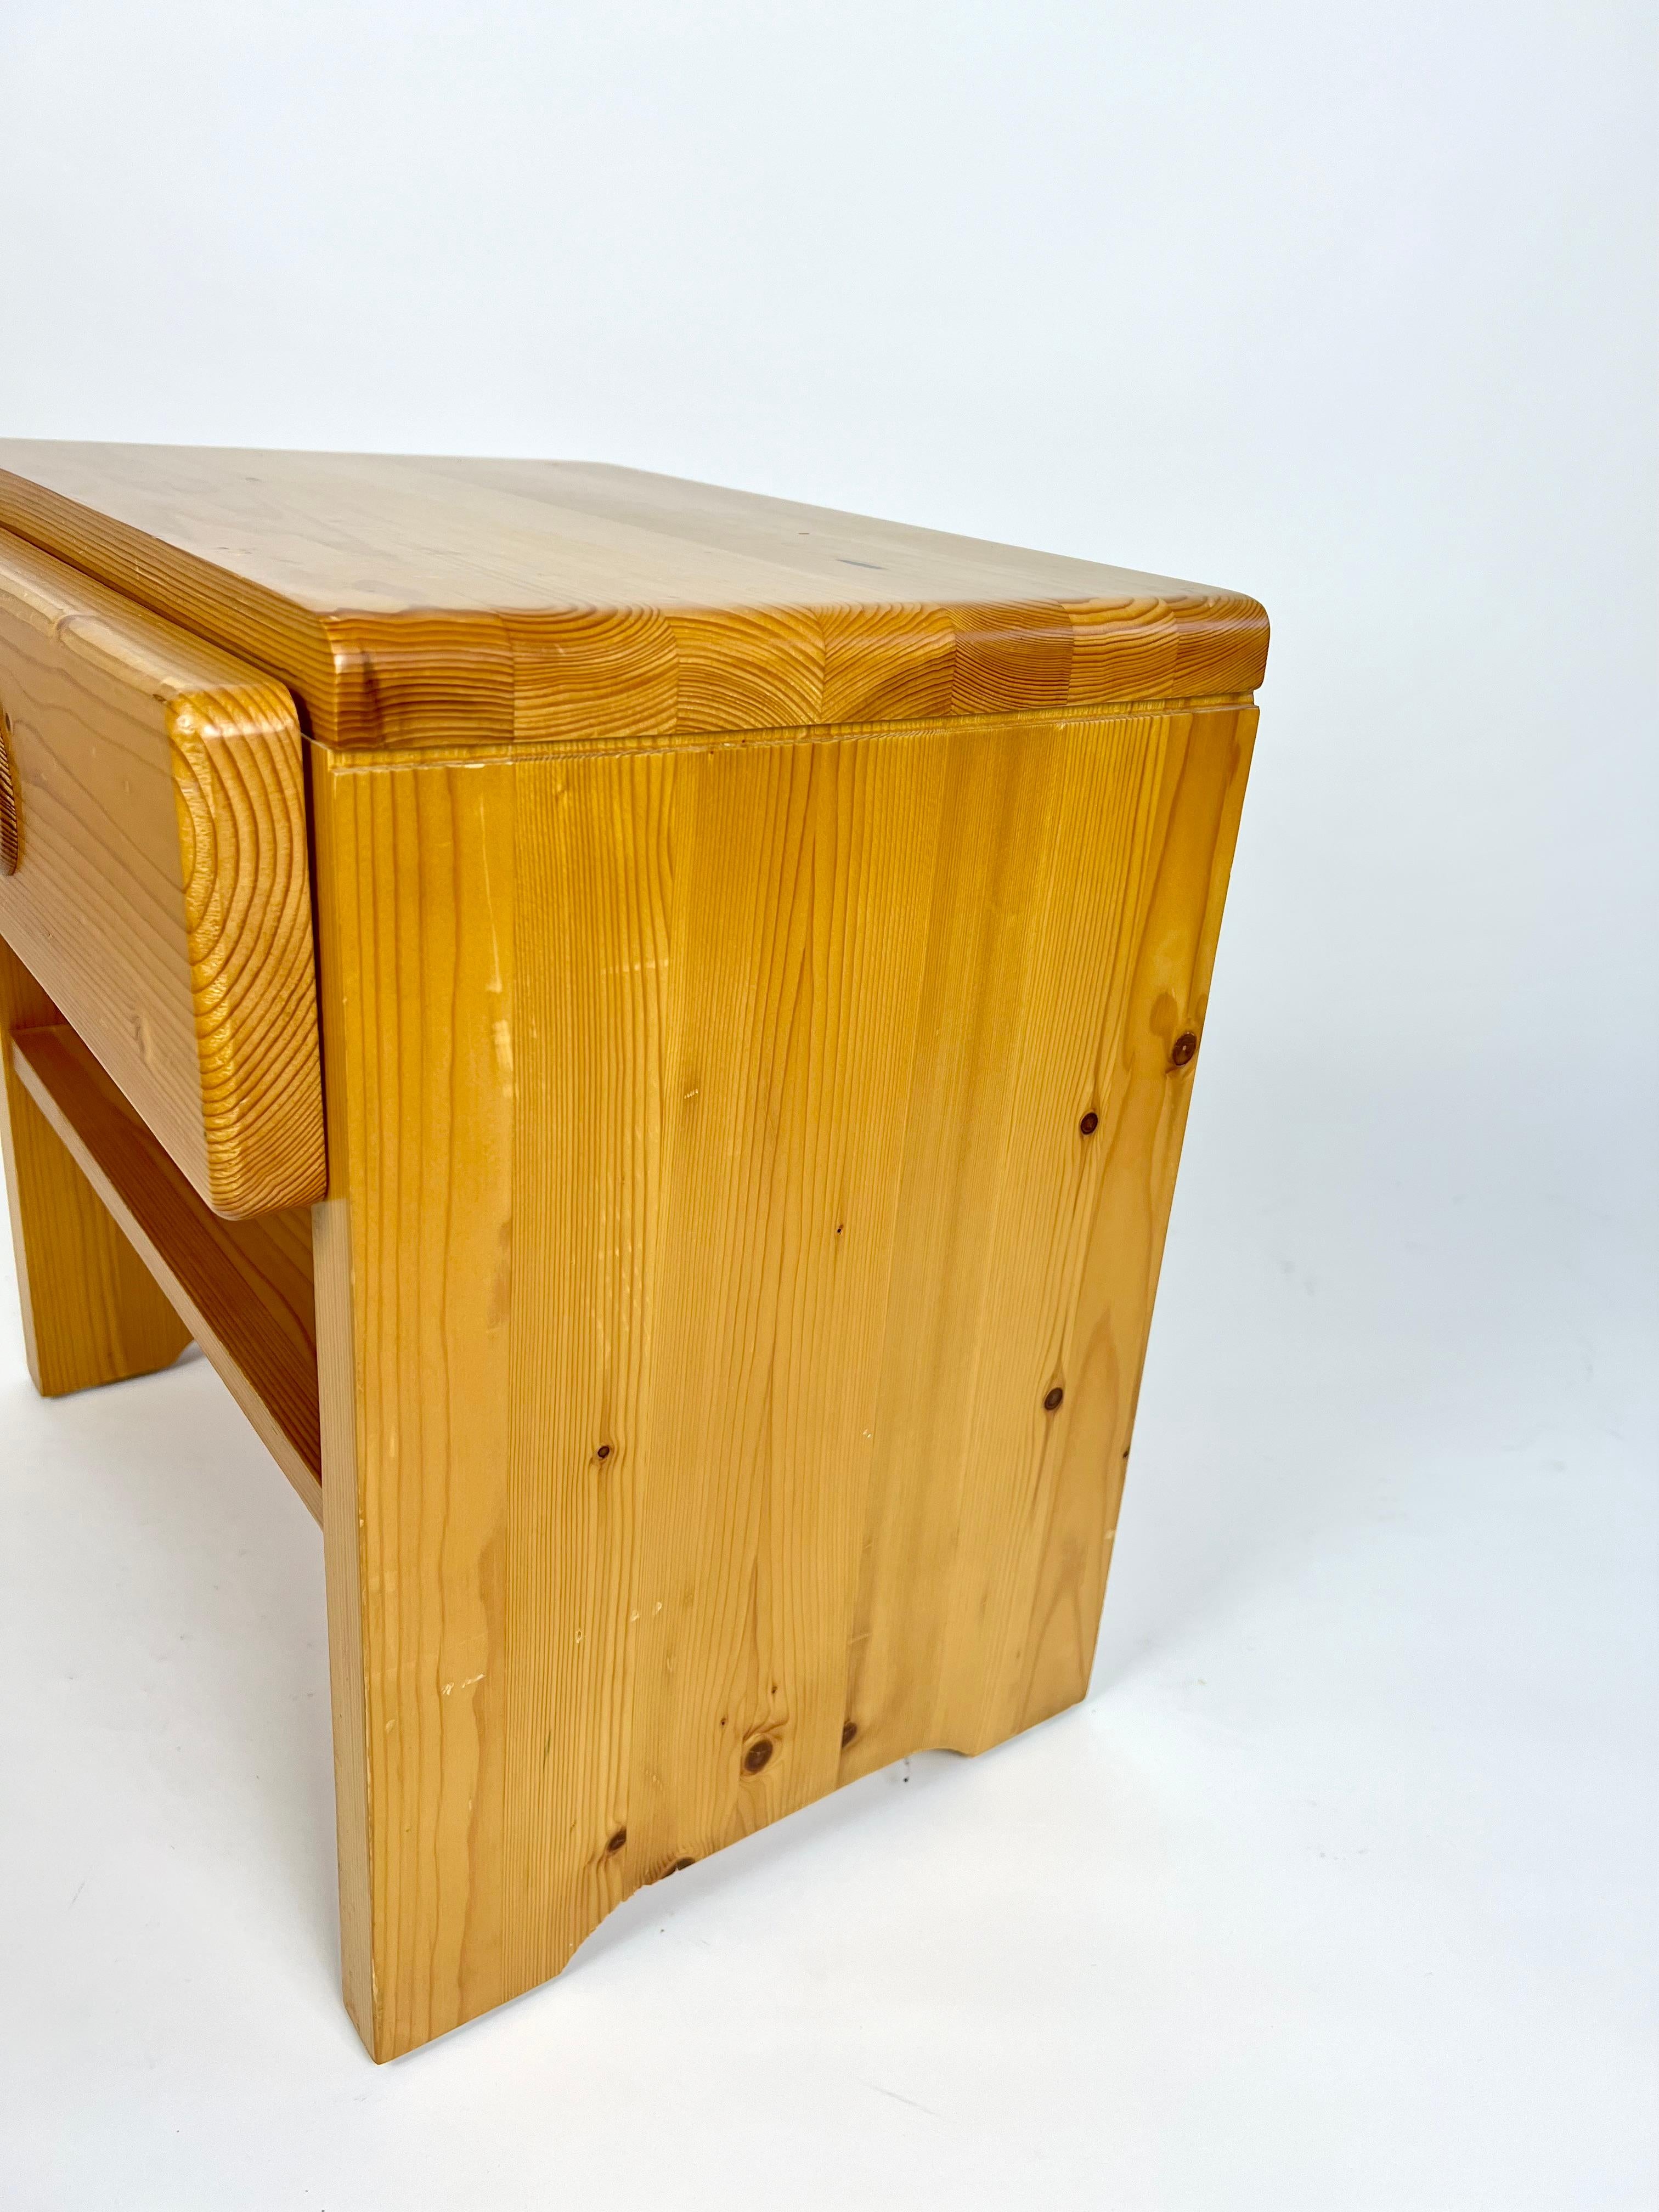 20th Century Vintage pine bedside table from Les Arcs, France. Charlotte Perriand